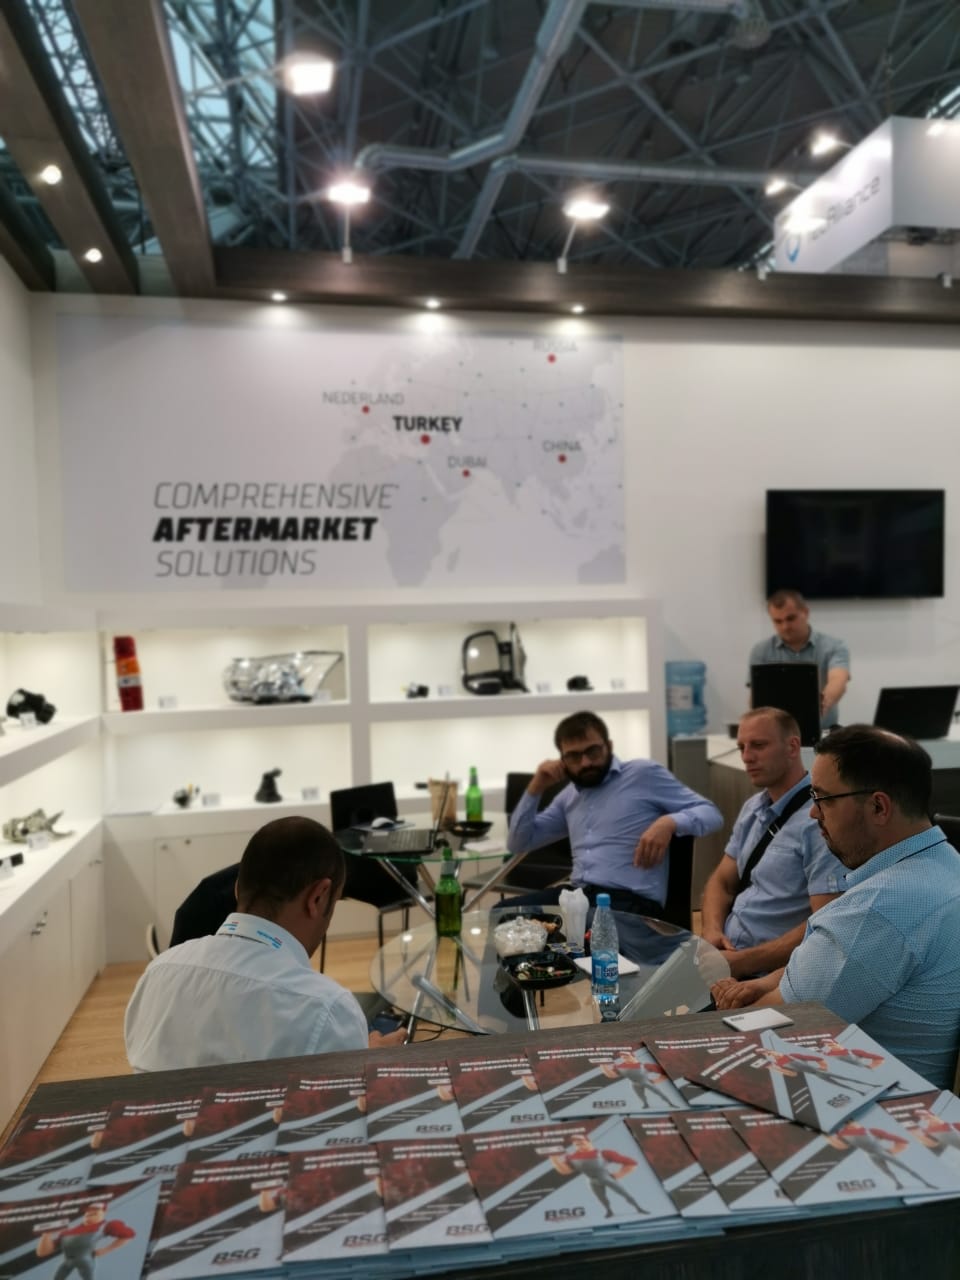 <p>BSG Auto Parts, one of the Turkey's leading aftermarket parts brands joined the 13th. Automechanika Moscow which is held on 26 to 29 August 2019. This is the biggest trade expo in the CIS and Russian region. </p>

<p>Approximately 30,000 people from all over the world visited Russia's most important automotive supplier industry expo in Russia. As one of the biggest exhibitors, BSG came together with its current and potential business partners, as a high quality parts supplier for automobiles and light commercial vehicles, including accessory, equipment and other related parts. </p>